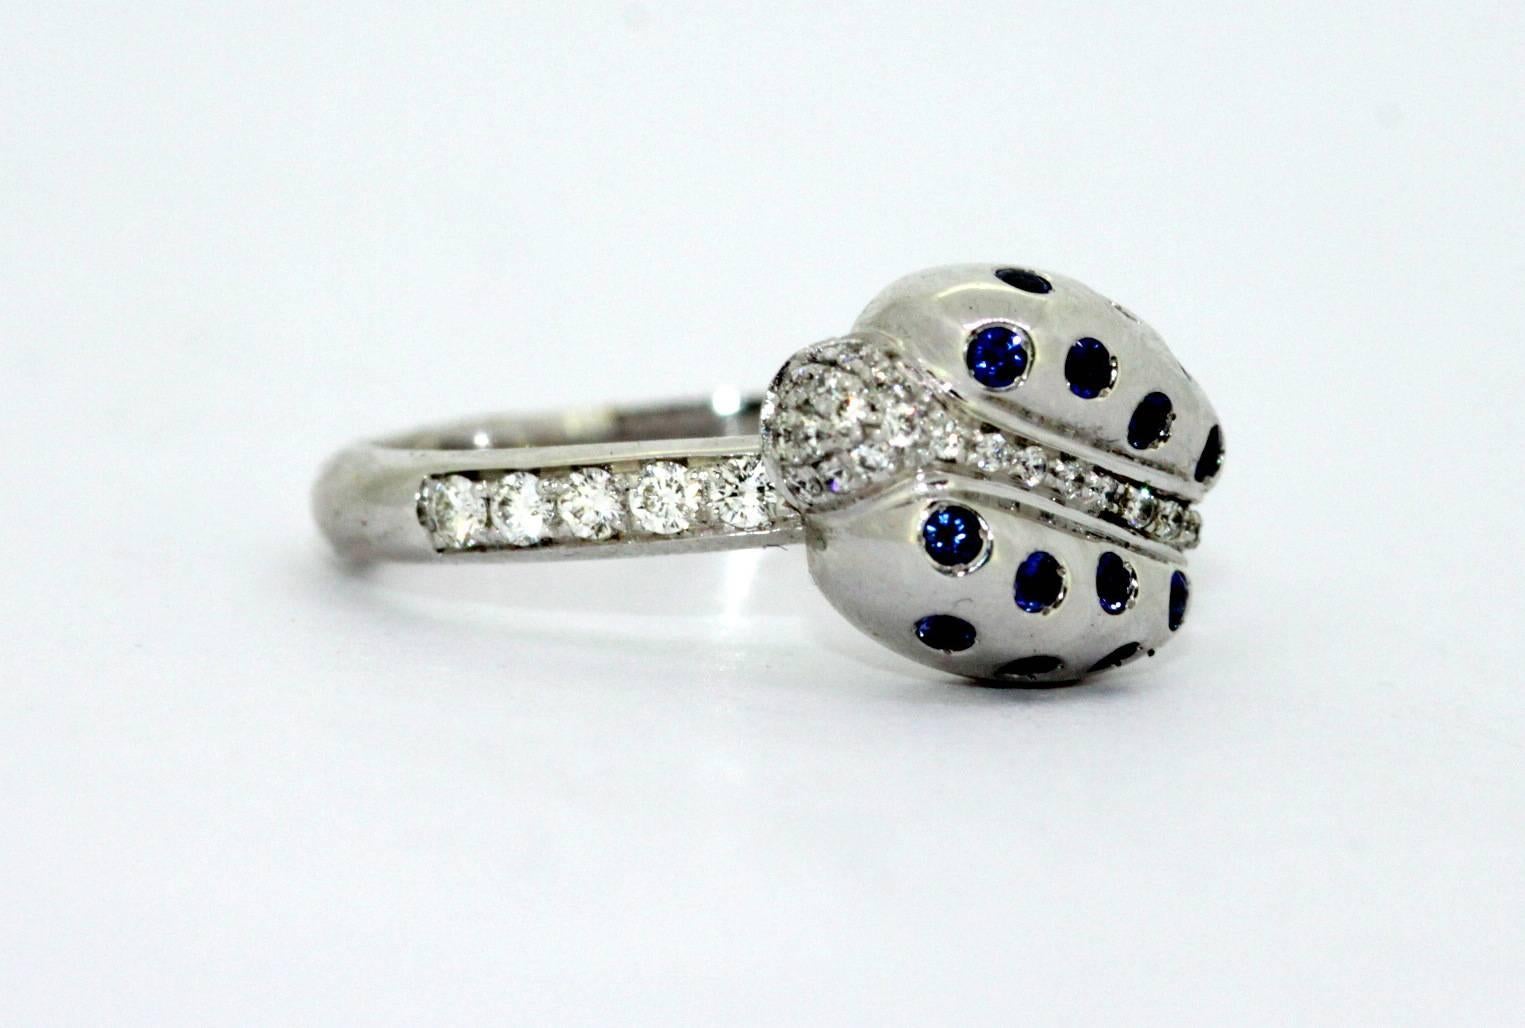 18k white gold ladies ladybird ring with diamonds and blue sapphire
Designer : Faraone
Made in Italy
Fully hallmarked

Faraone was the one to launch Tiffany&co’s story. Back in 1989 Faraone signed an exclusive partnership with the quite unknown in